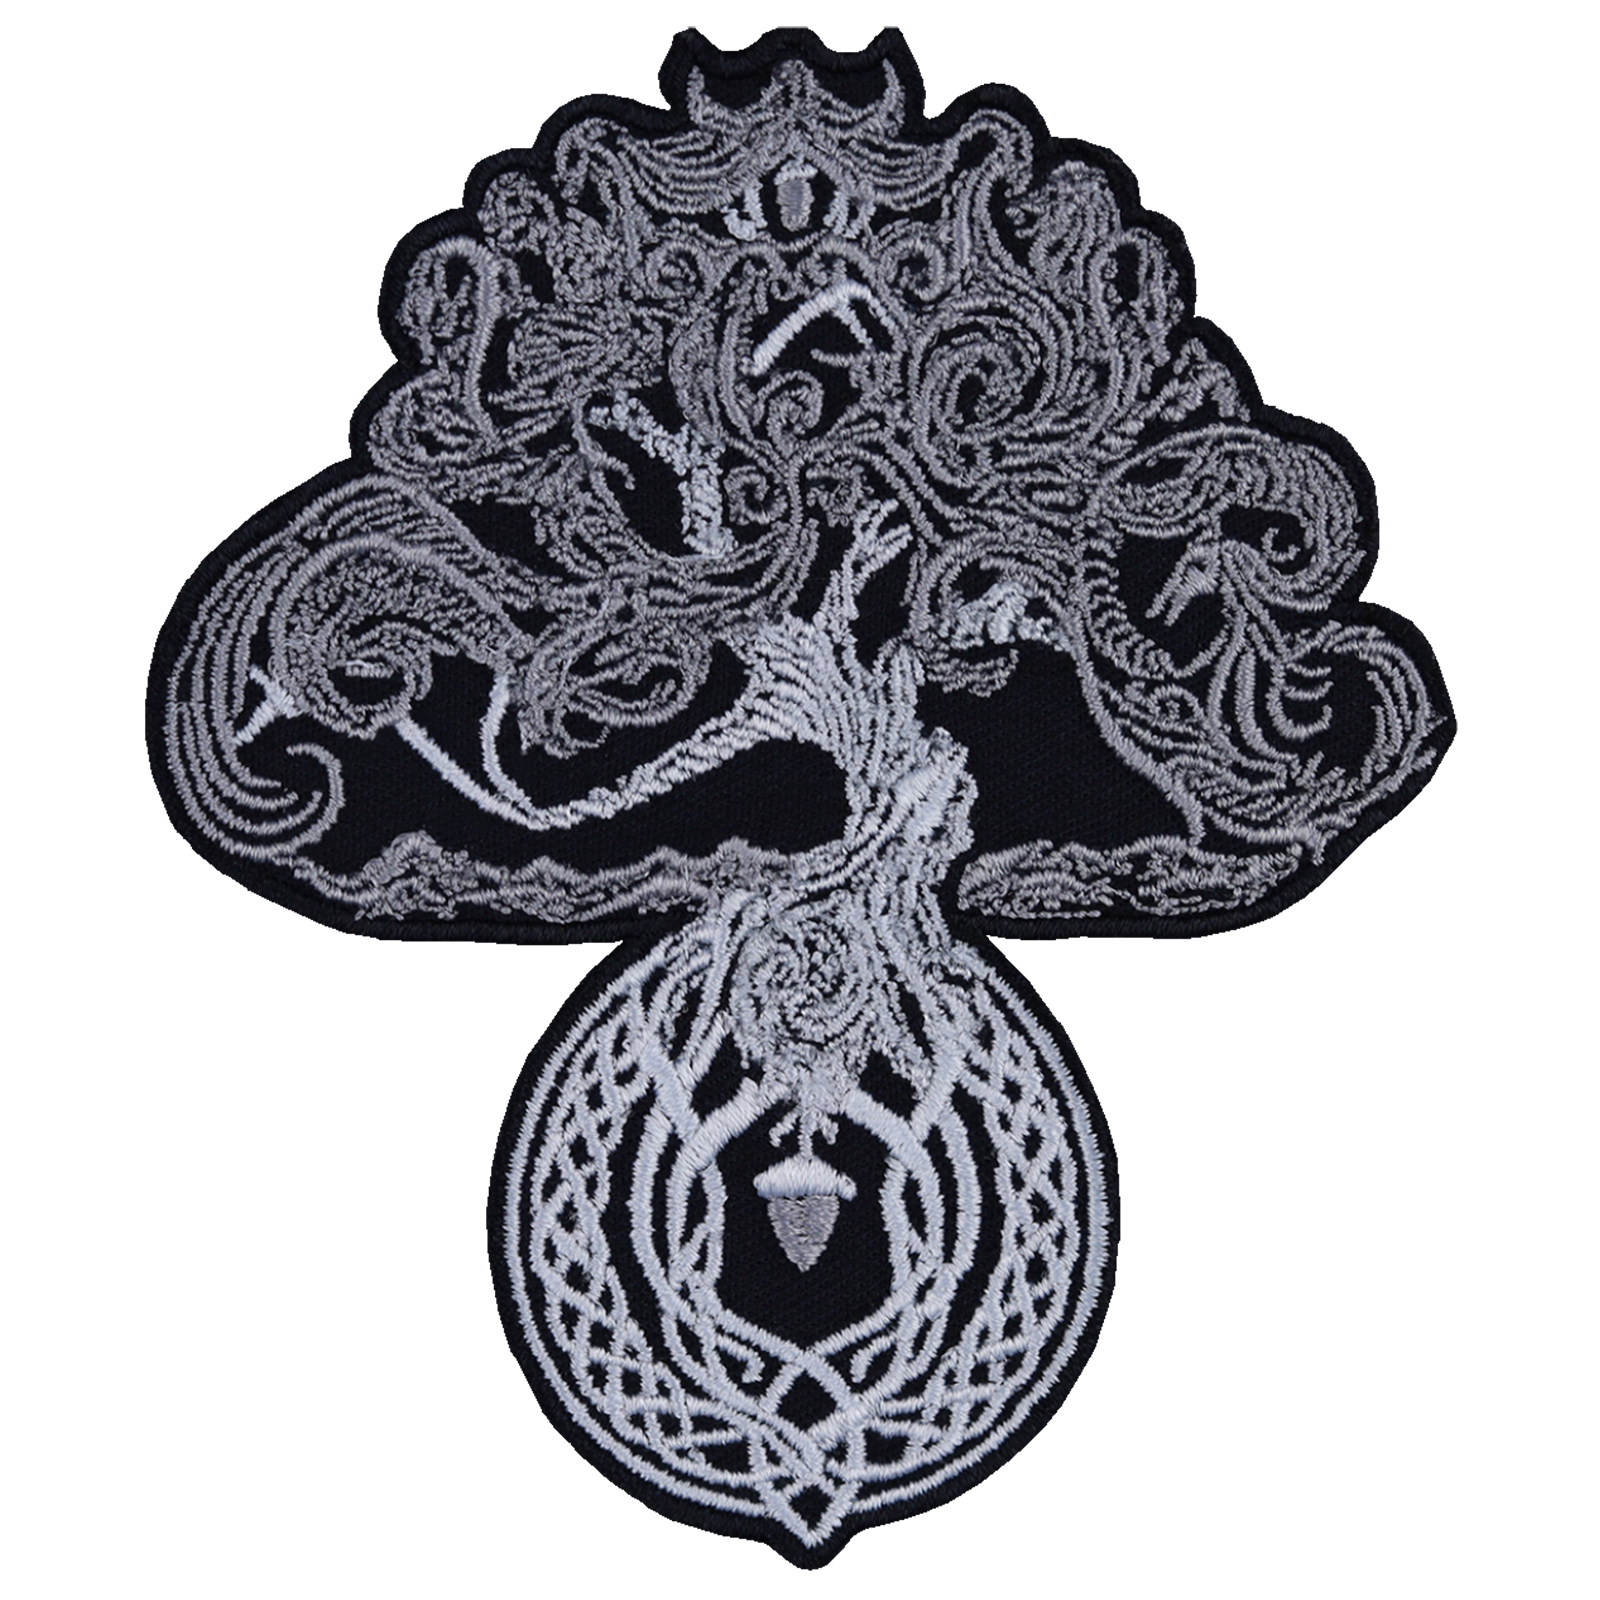 Yggdrasil - Tree of life - Patch